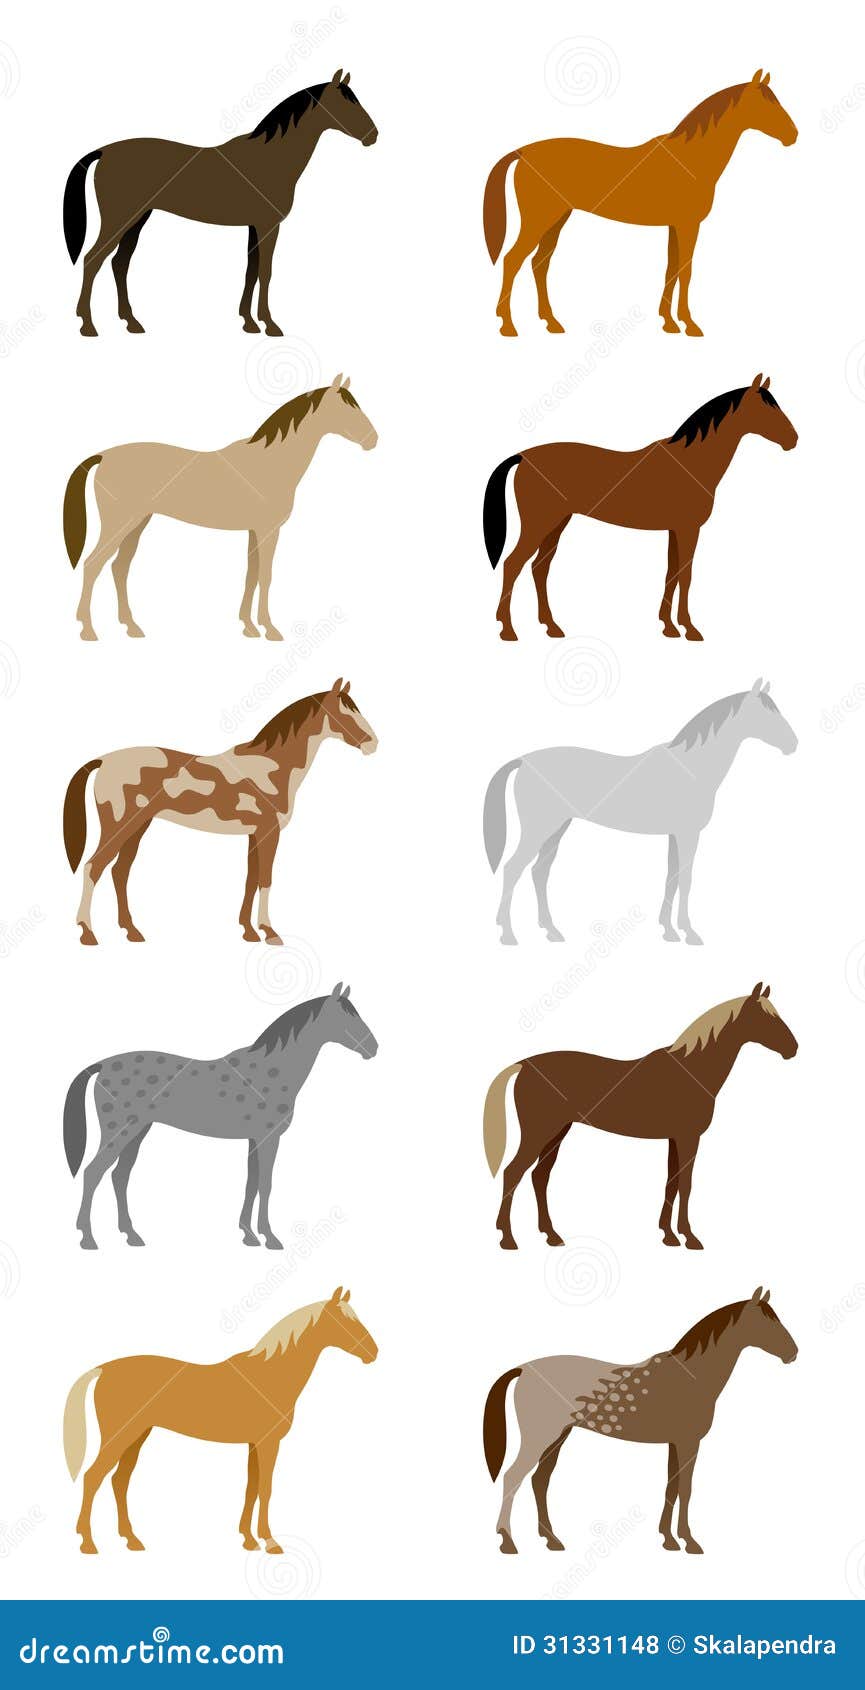 Piebald, Skewbald, Pinto Horse Color Chart On White. Equine Coat Colors ...